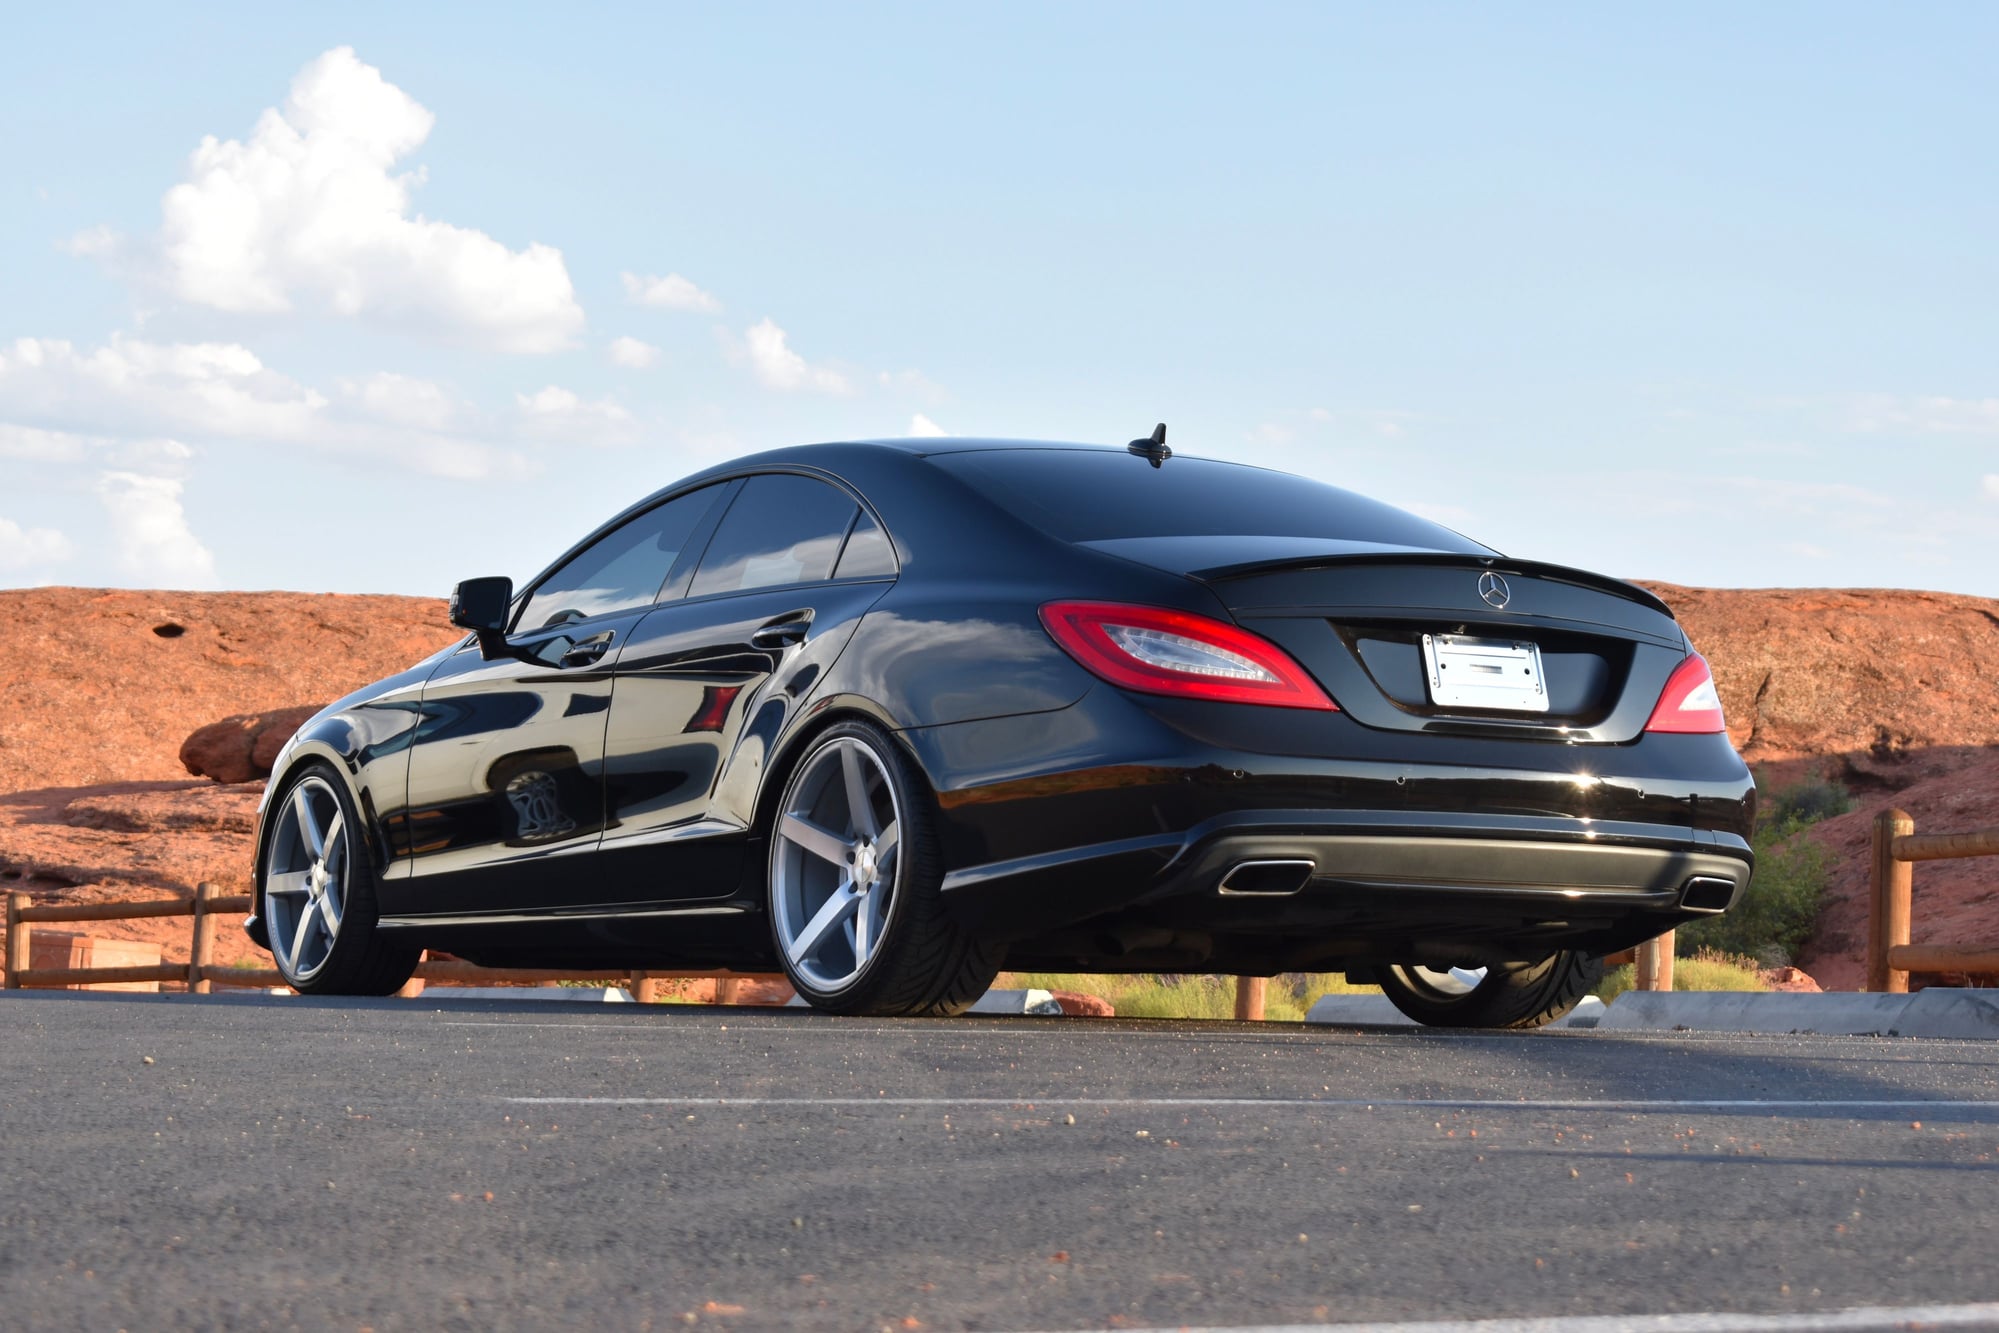 2014 Mercedes-Benz CLS550 - 2014 Mercedes CLS550 - Vossen Wheels - Lowering module - Used - VIN WDDLJ7DB3EA120235 - 79,934 Miles - 8 cyl - 2WD - Automatic - Sedan - Silver - St. George, UT 84790, United States